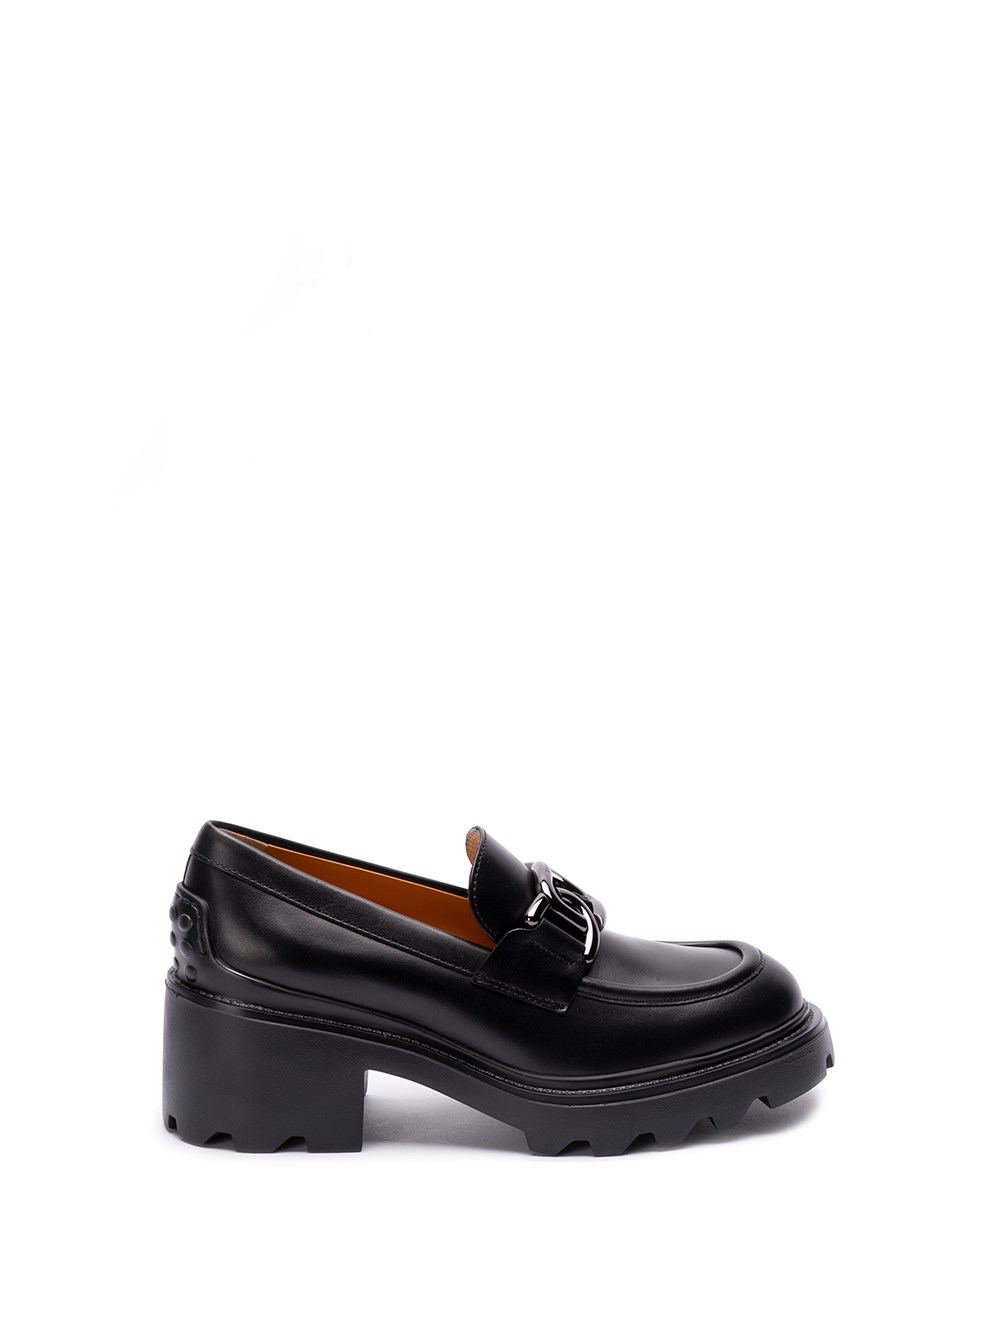 TOD'S `GOMMA CARRO` LOAFERS